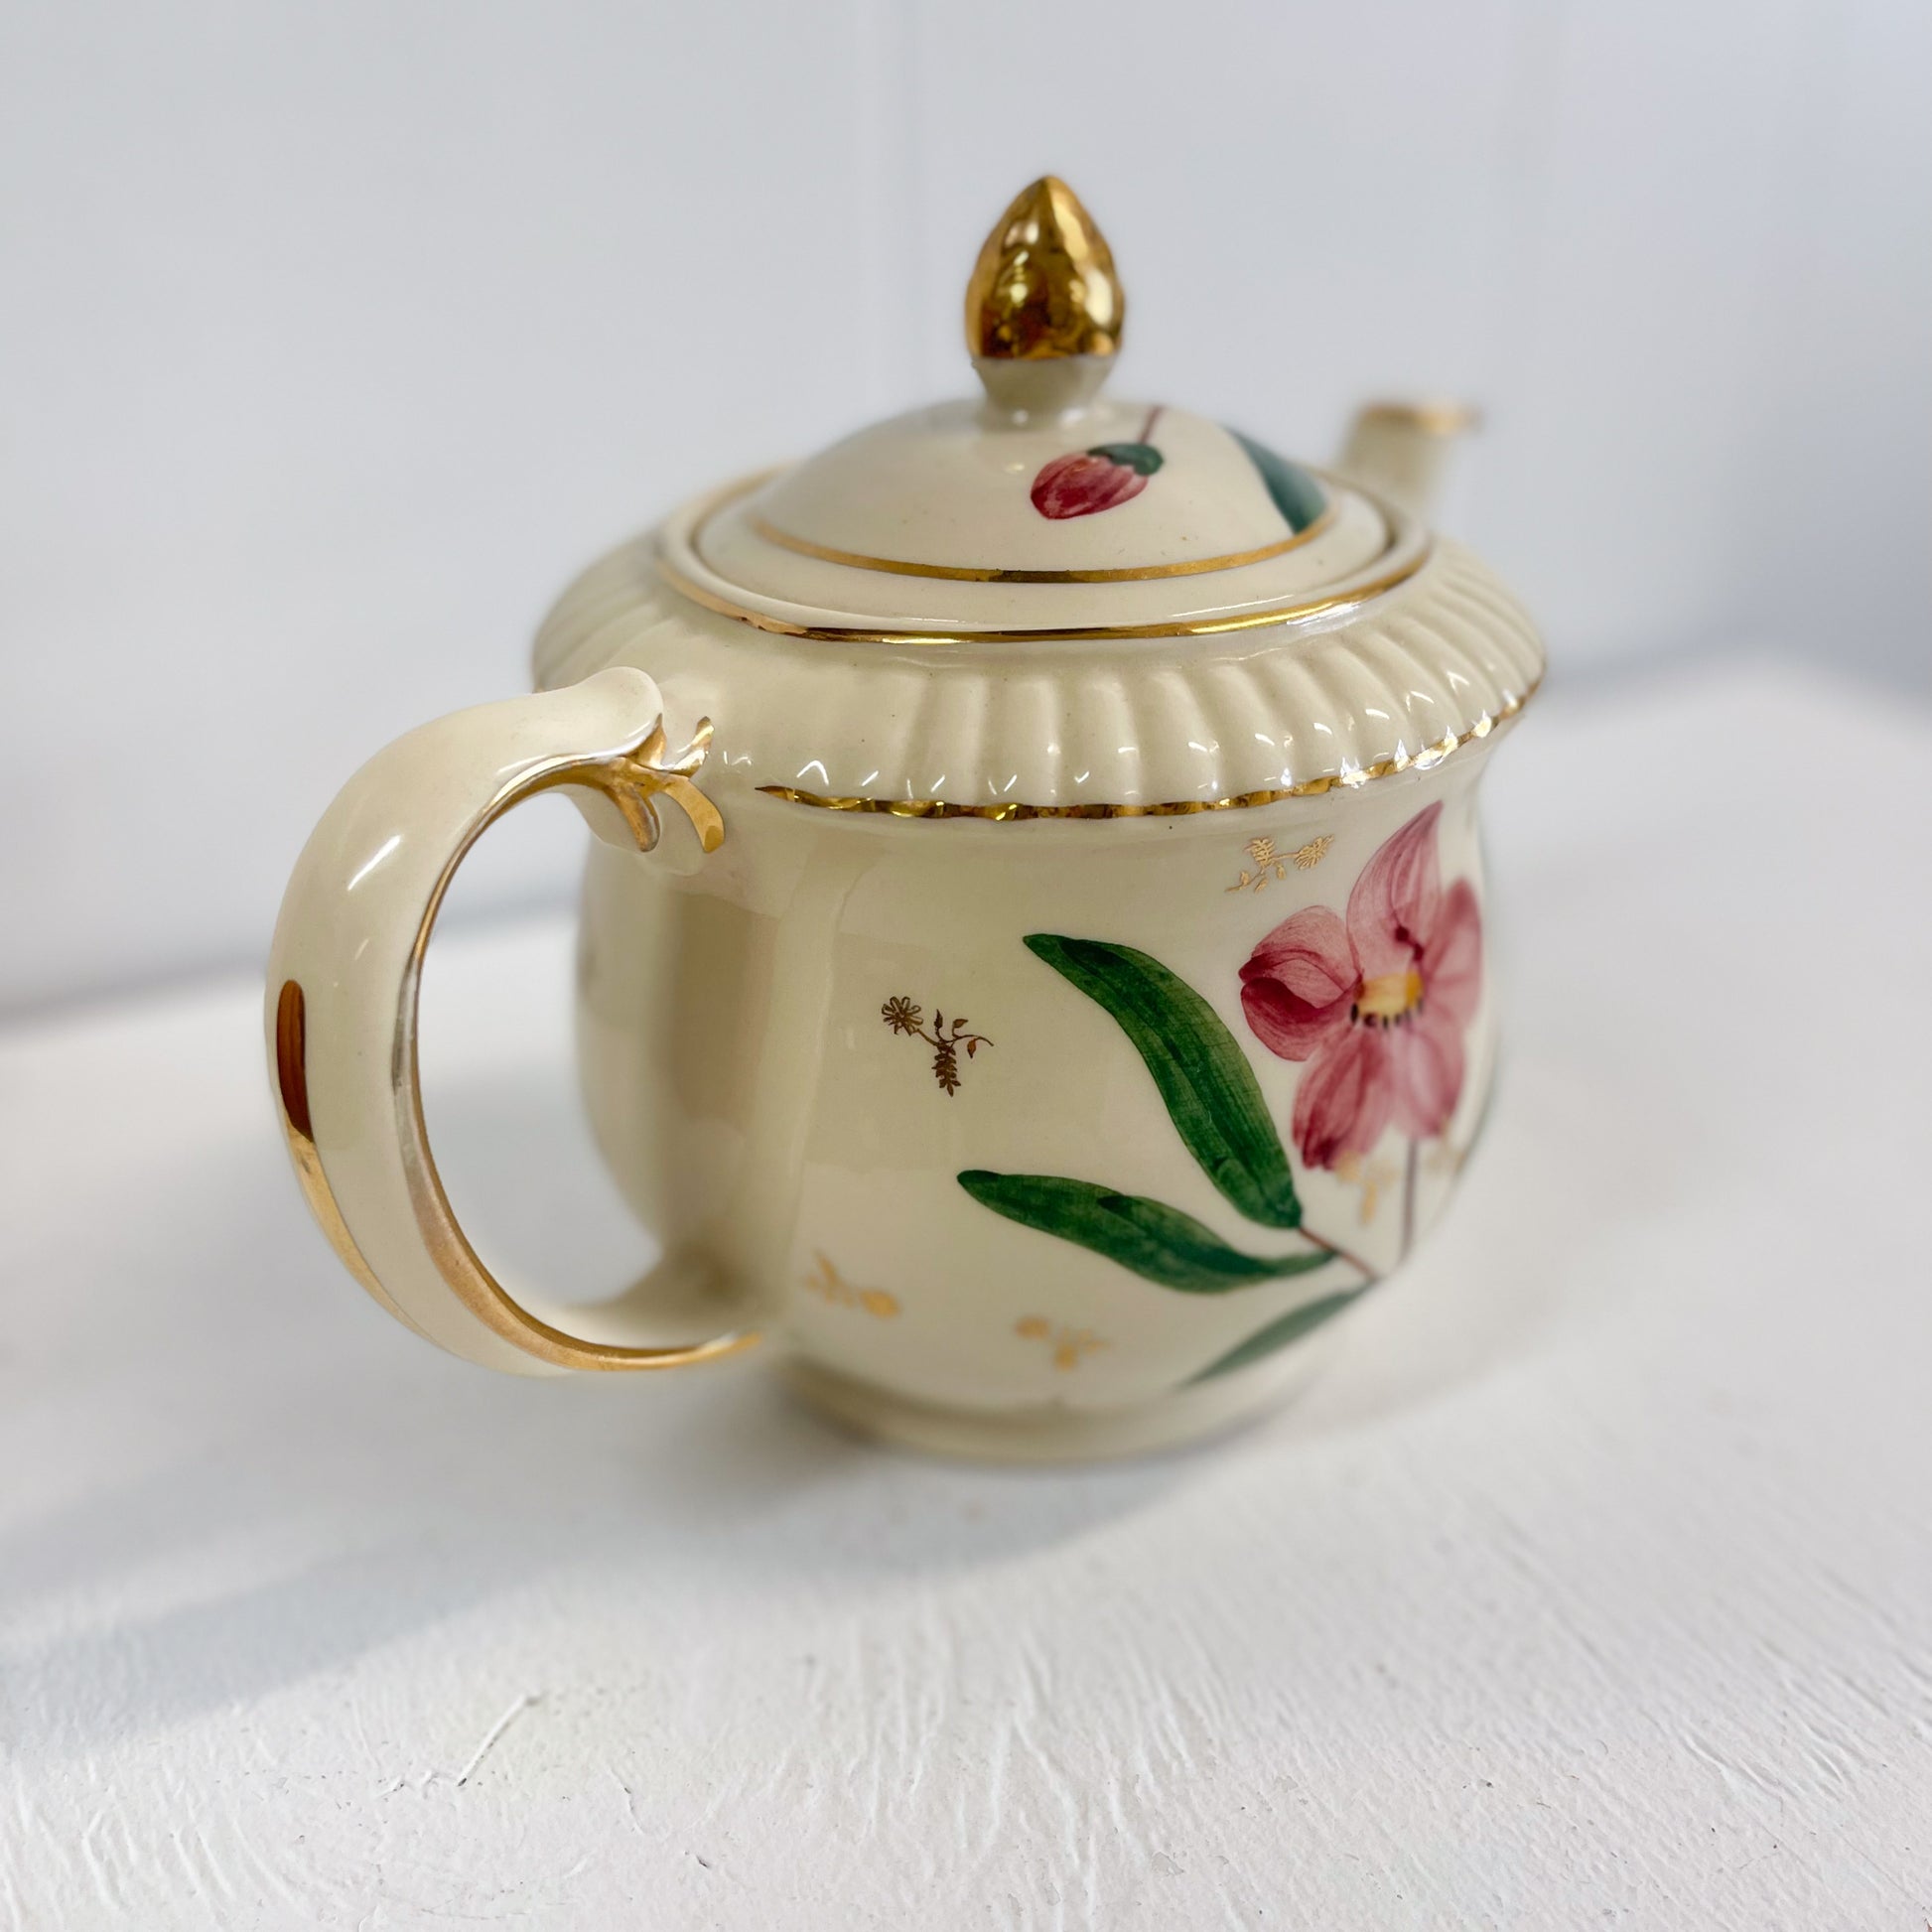 Floral Tea Pot by Shawnee Pottery USA